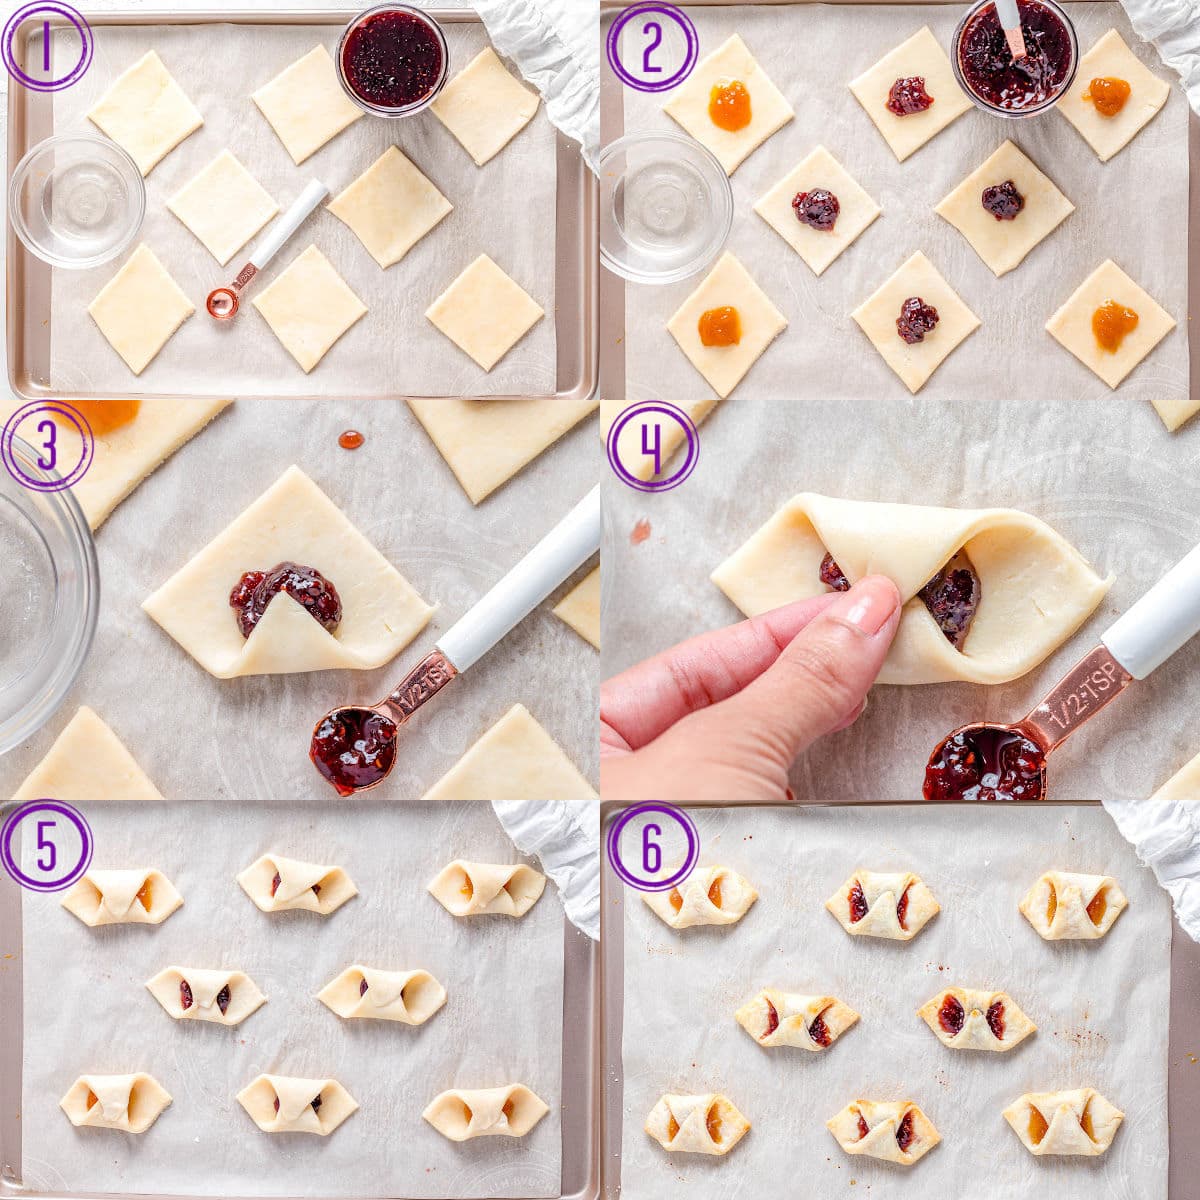 how to fold polish cookies shown in a six image collage.